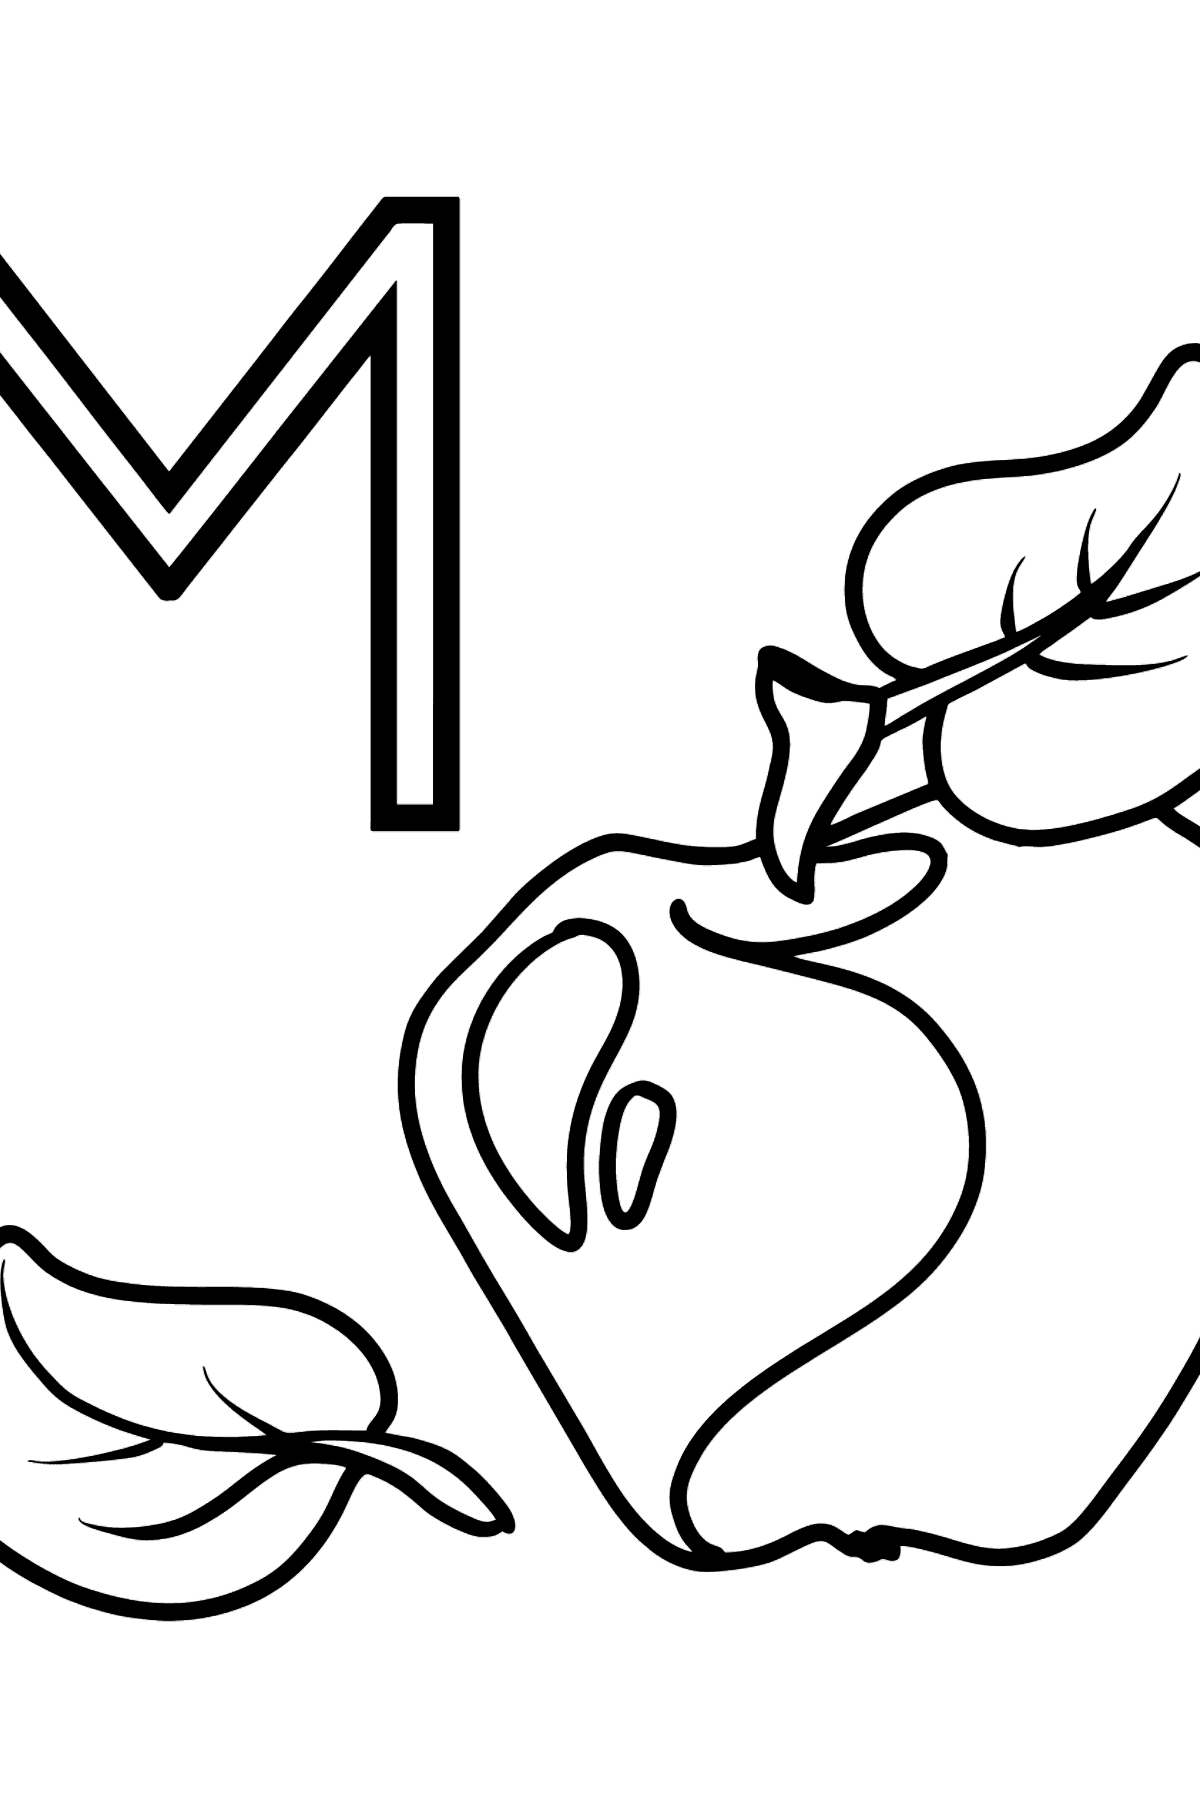 Spanish Letter M coloring pages - MANZANA - Coloring Pages for Kids